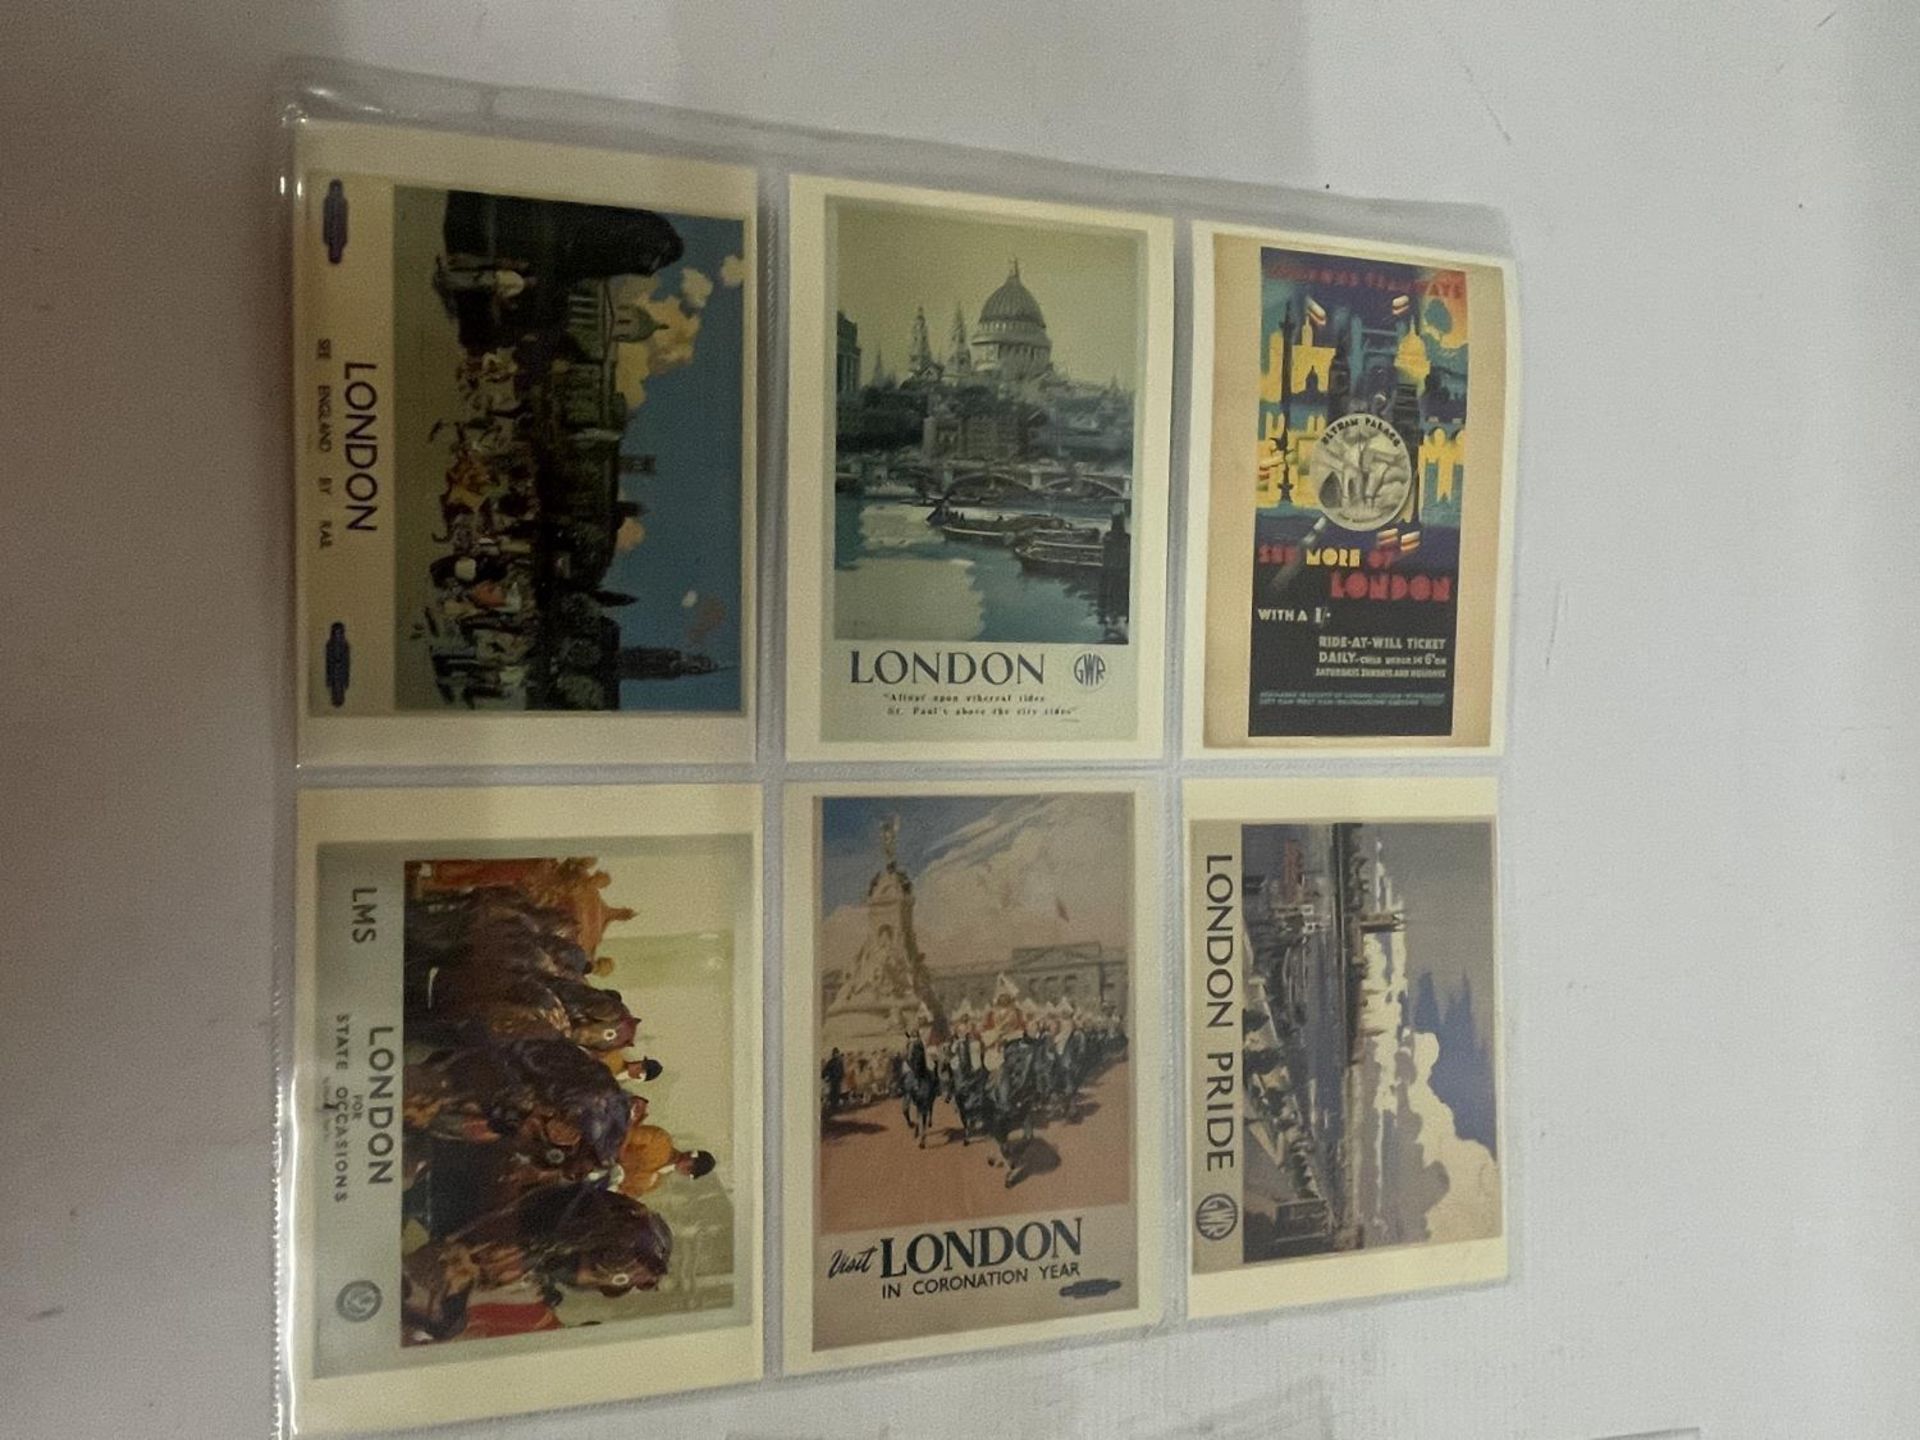 APPROXIMATELY 380 POSTCARDS RELATING TO BUSES, TRAMS, TROLLEY BUSES, UNDERGROUND,METROPOLITAN AND